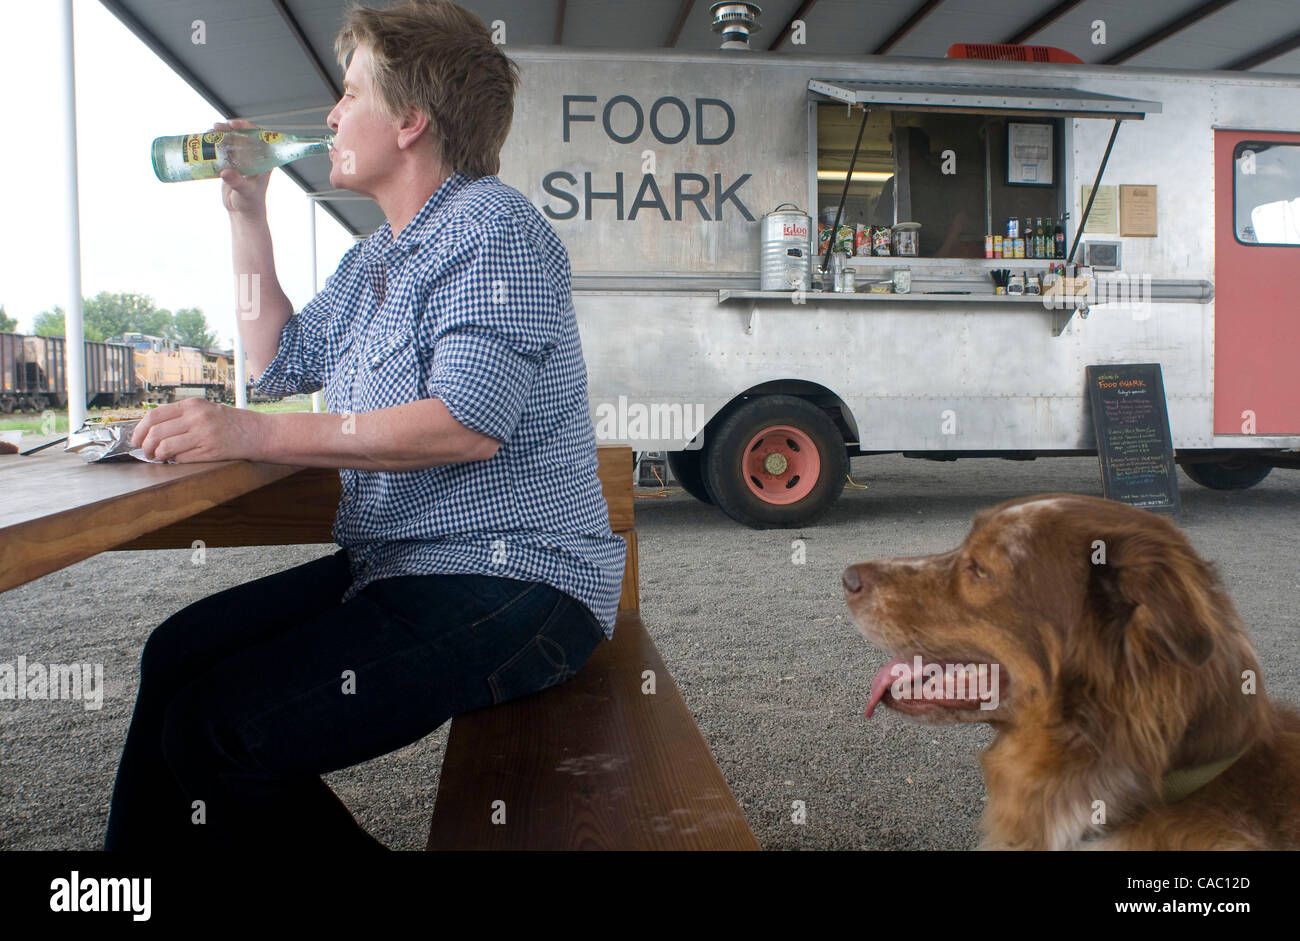 July 08, 2010 - Marfa, Texas, USA - July 8, 2010. LIZ LAMBERT has her lunch under the watchfull eyes of her dog Moses at The Food Shark food truck in Marfa, Texas  which is equipped with a kitchen and serves up a mix of Tex-Mex and vegetarian dishes emphasising natural ingredients and great taste. ( Stock Photo